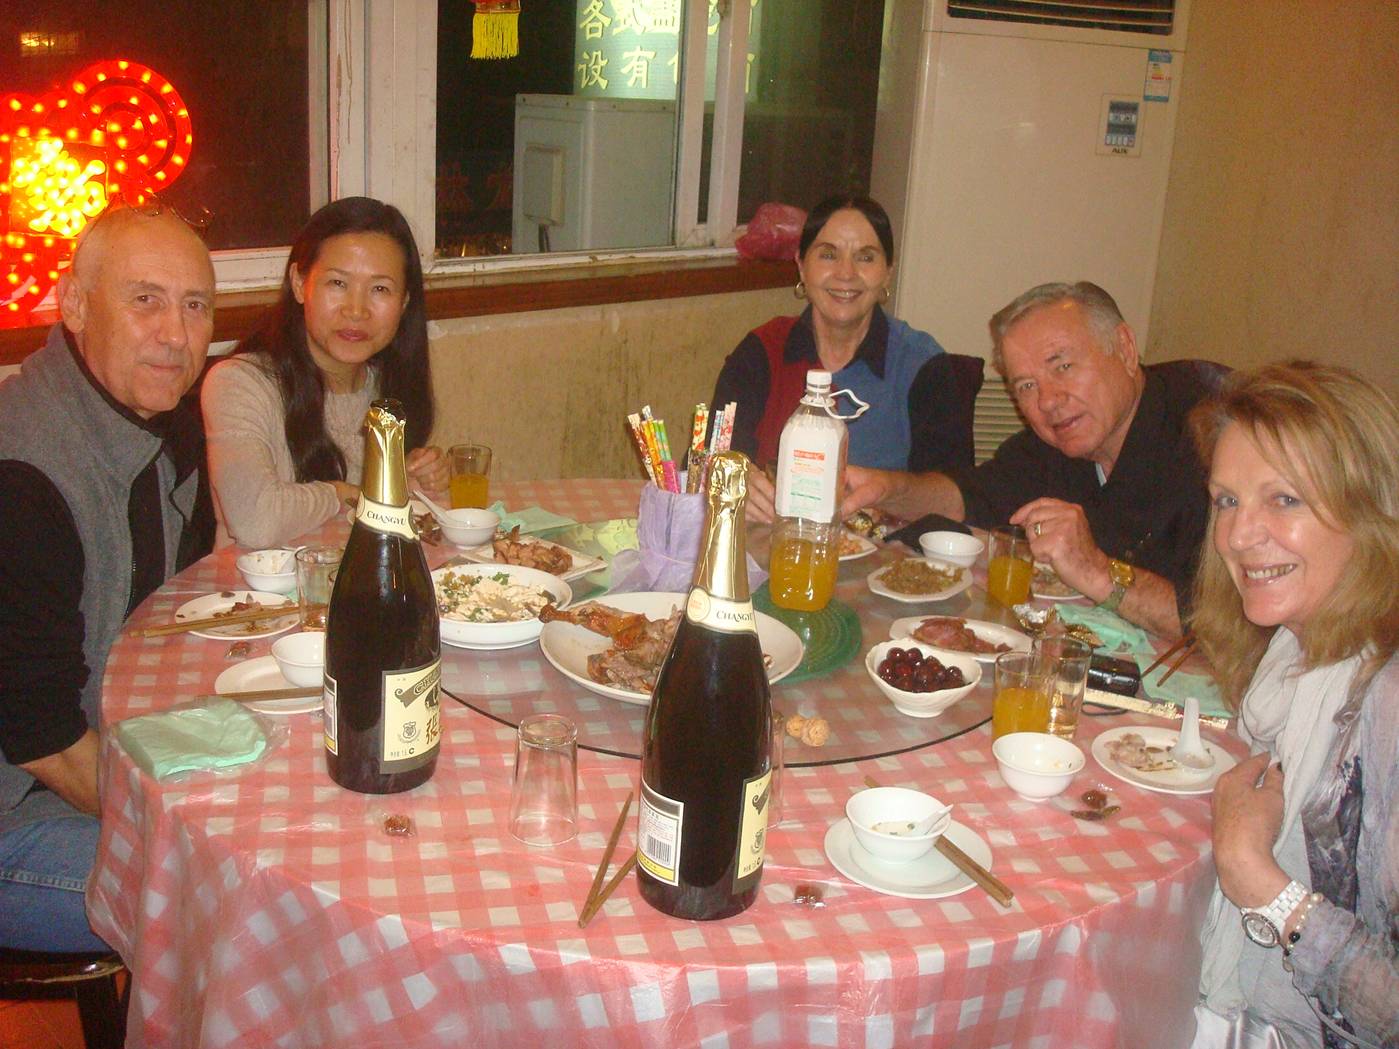 Picture:  Jack, Cathy, Bonnie and Don, and Marion, our Australian friend who delayed a flight to join us.  Shitang Cun, Wuxi, China